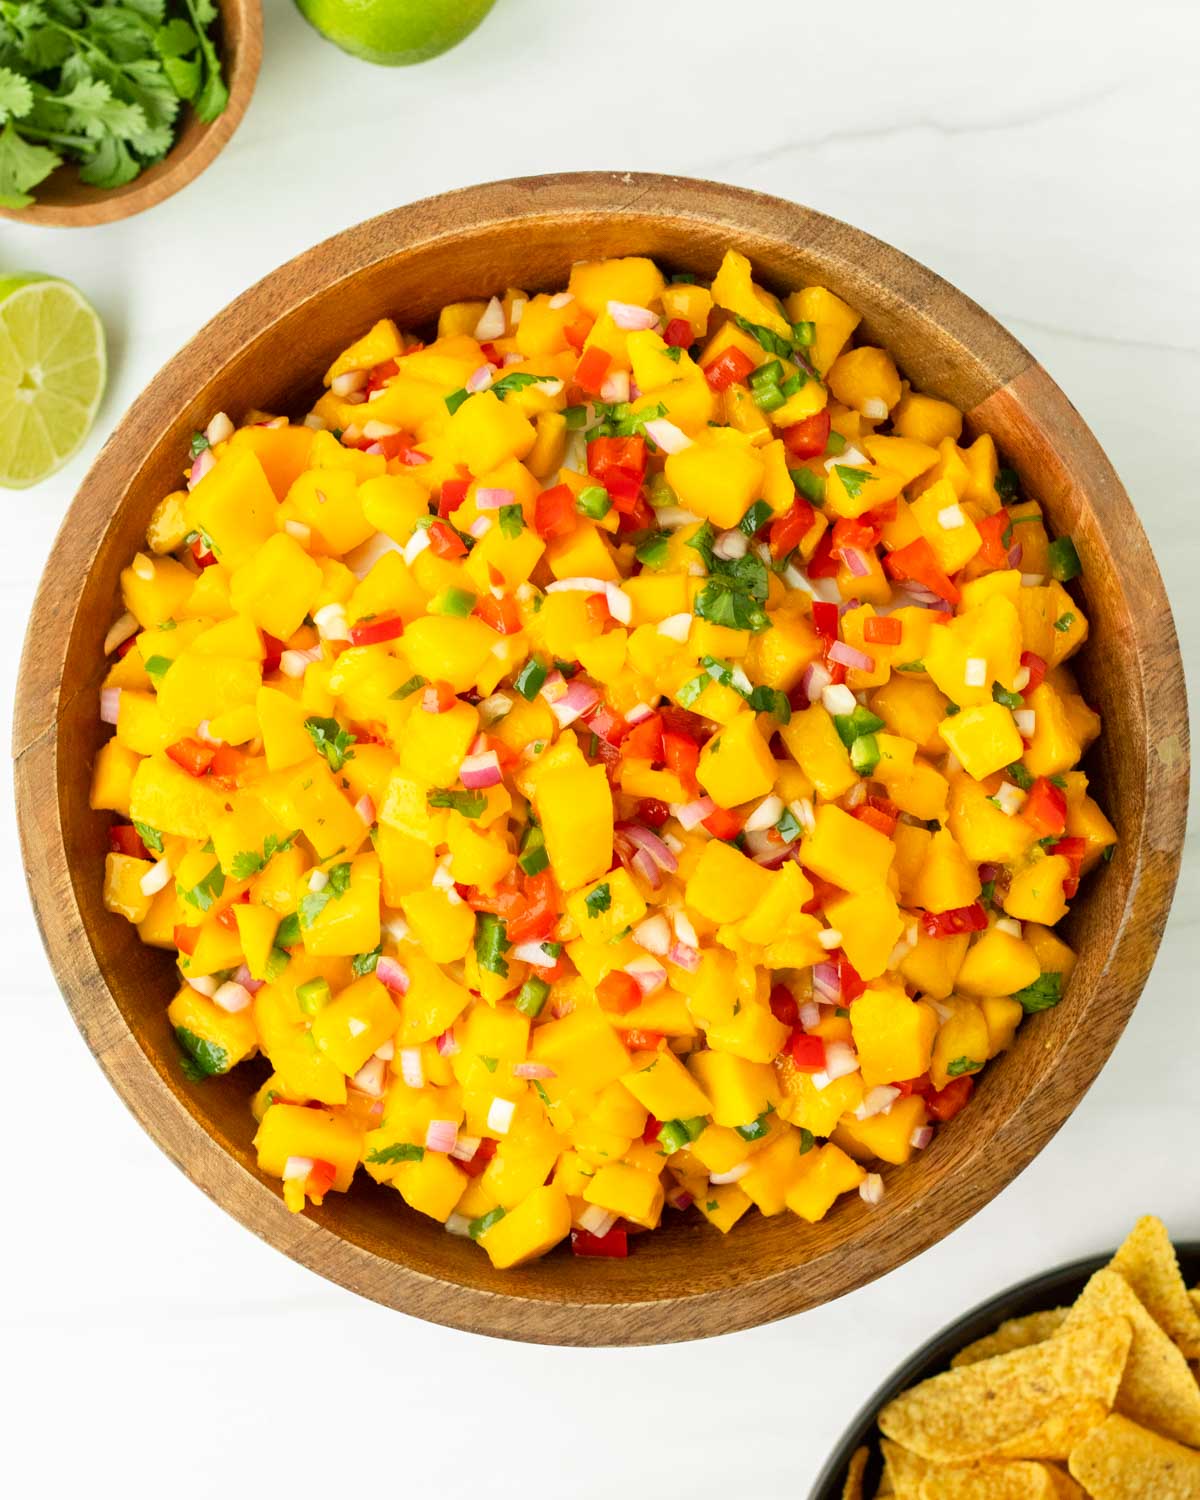 This mango salsa is an easy 6-ingredient salsa recipe perfect for a summer cookout or as a Fourth of July appetizer. Made with simple, flavorful ingredients, this homemade salsa is an easy and delicious summer dish.